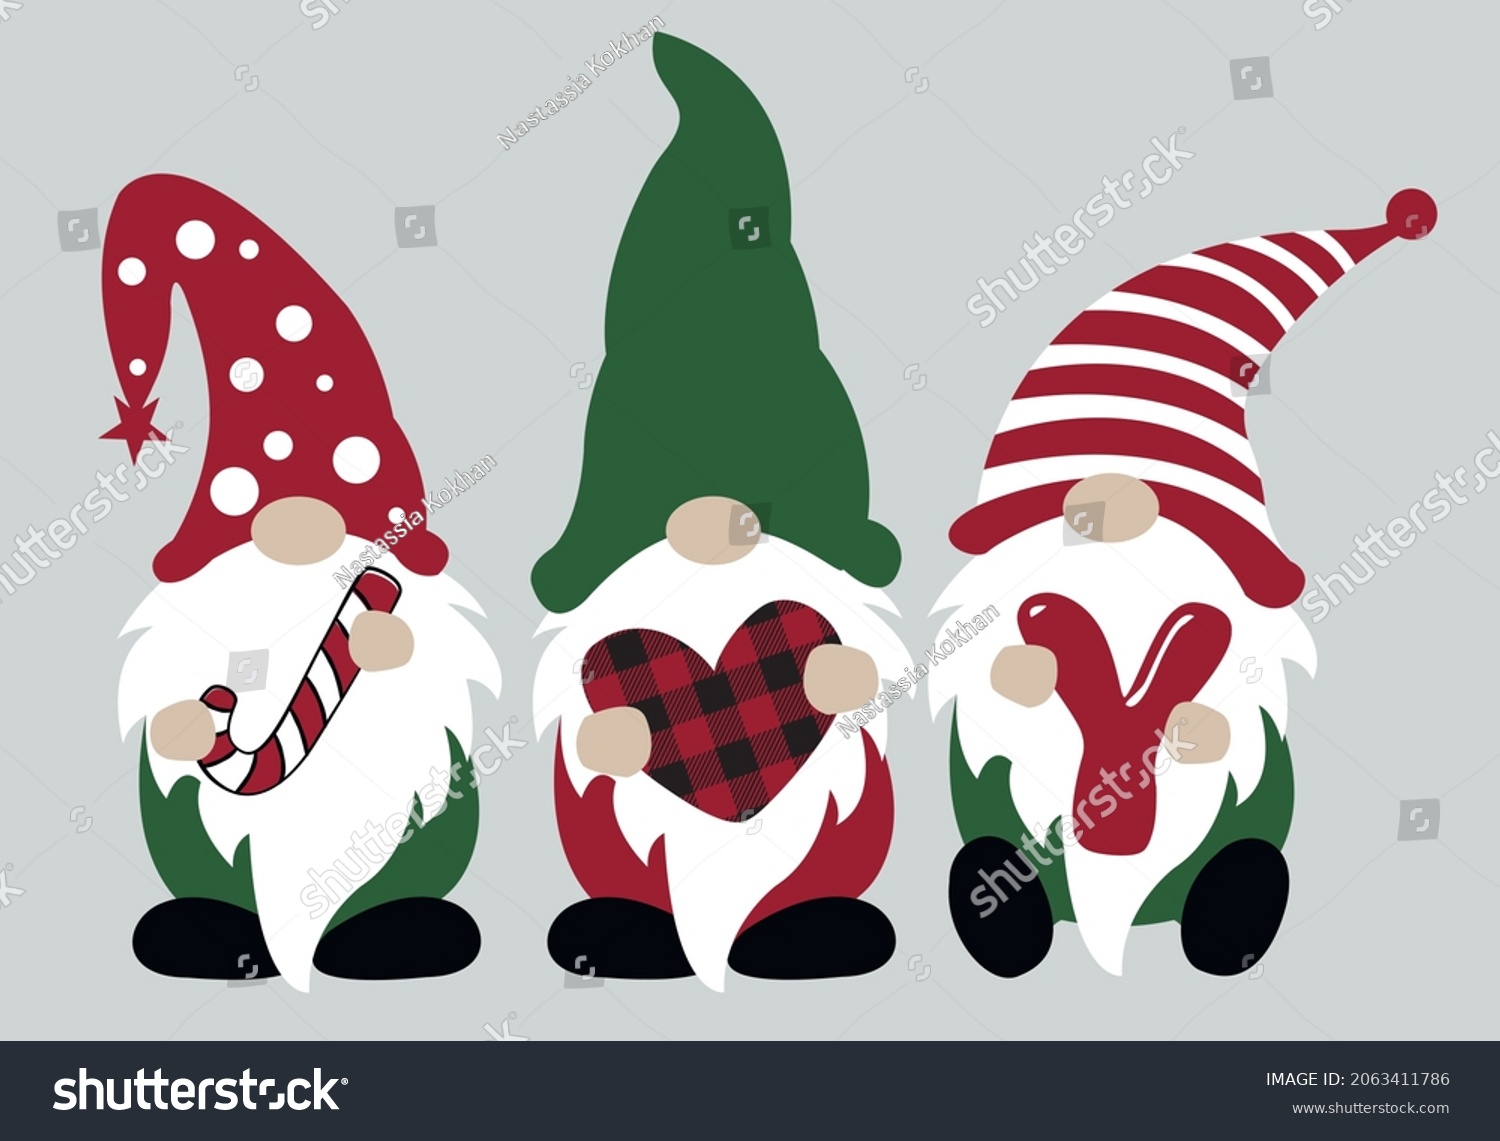 SVG of Christmas gnome svg vector Illustration. Three gnomes are holding new year items. Cute christmas gnome shirt design and home decor for winter vacation.Scandinavian gnome with decoration in hands  svg